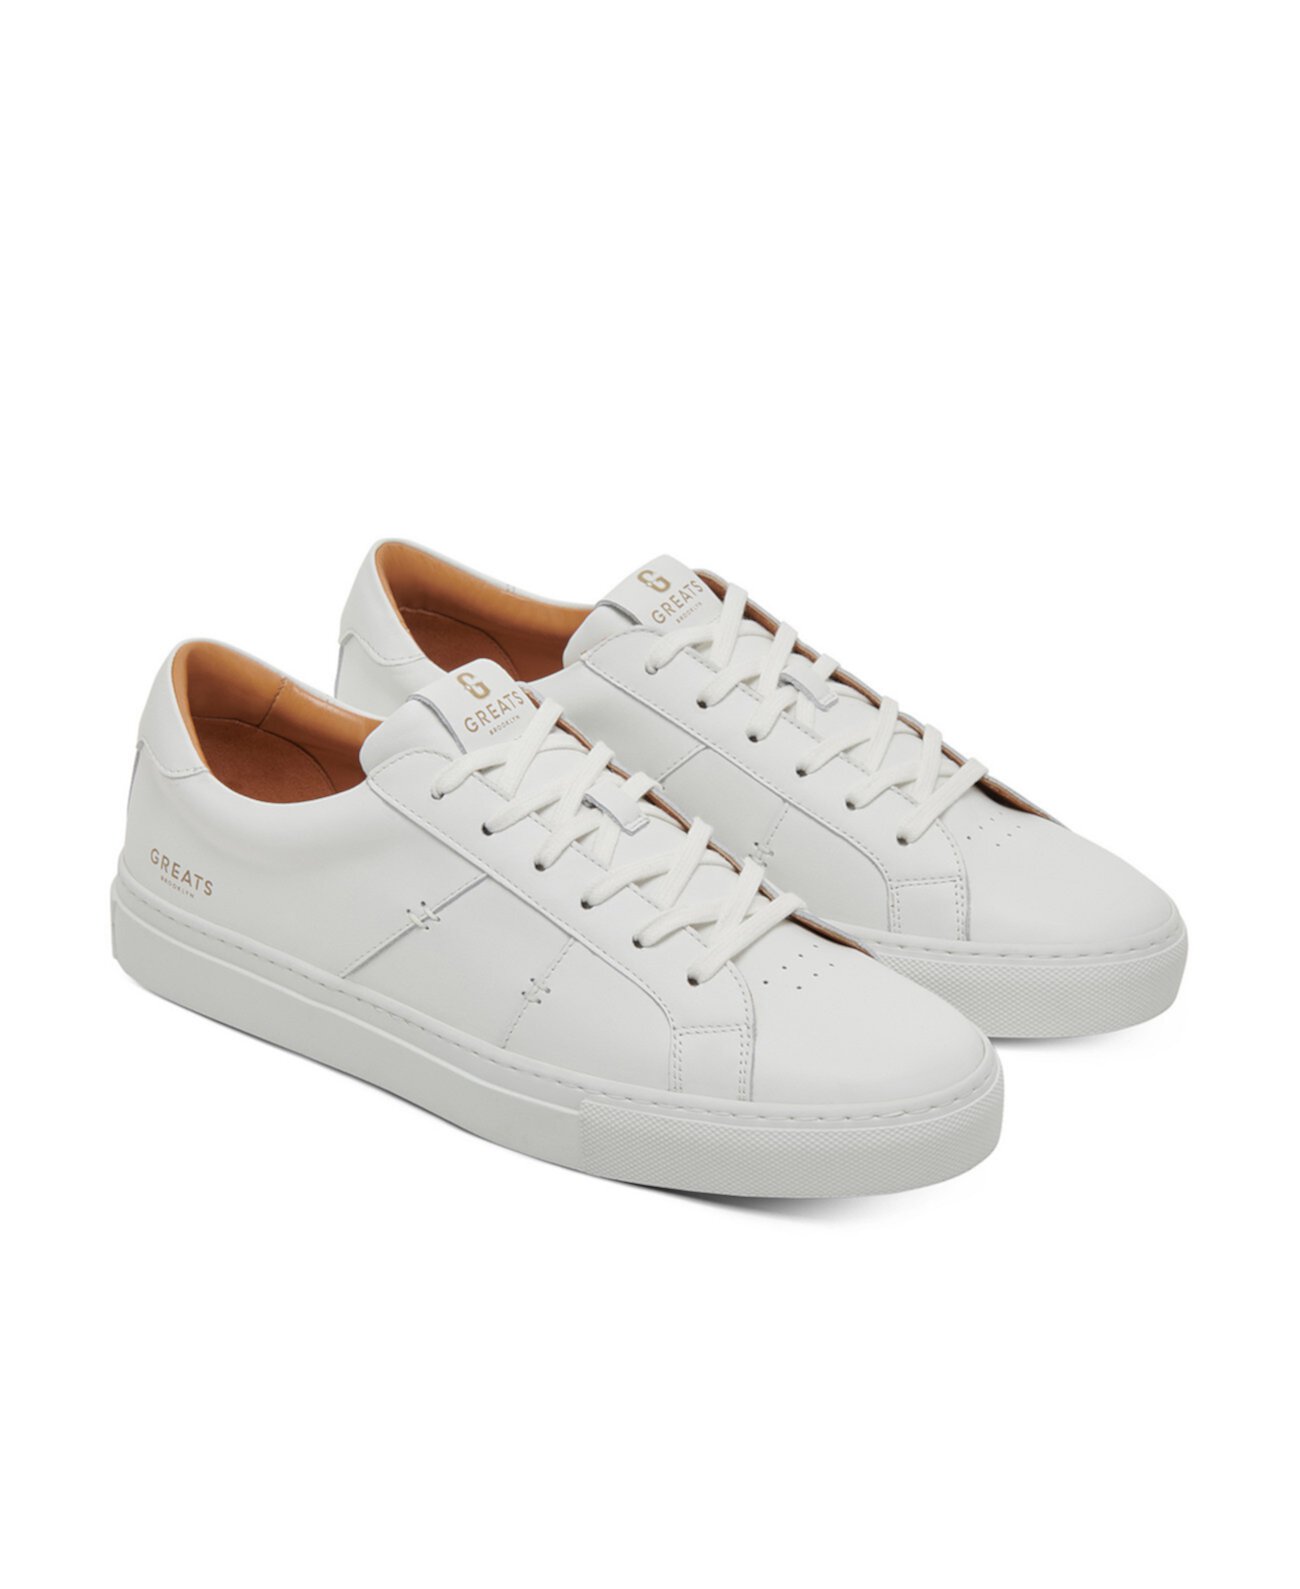 Men's Royale 2.0 Leather Sneakers GREATS